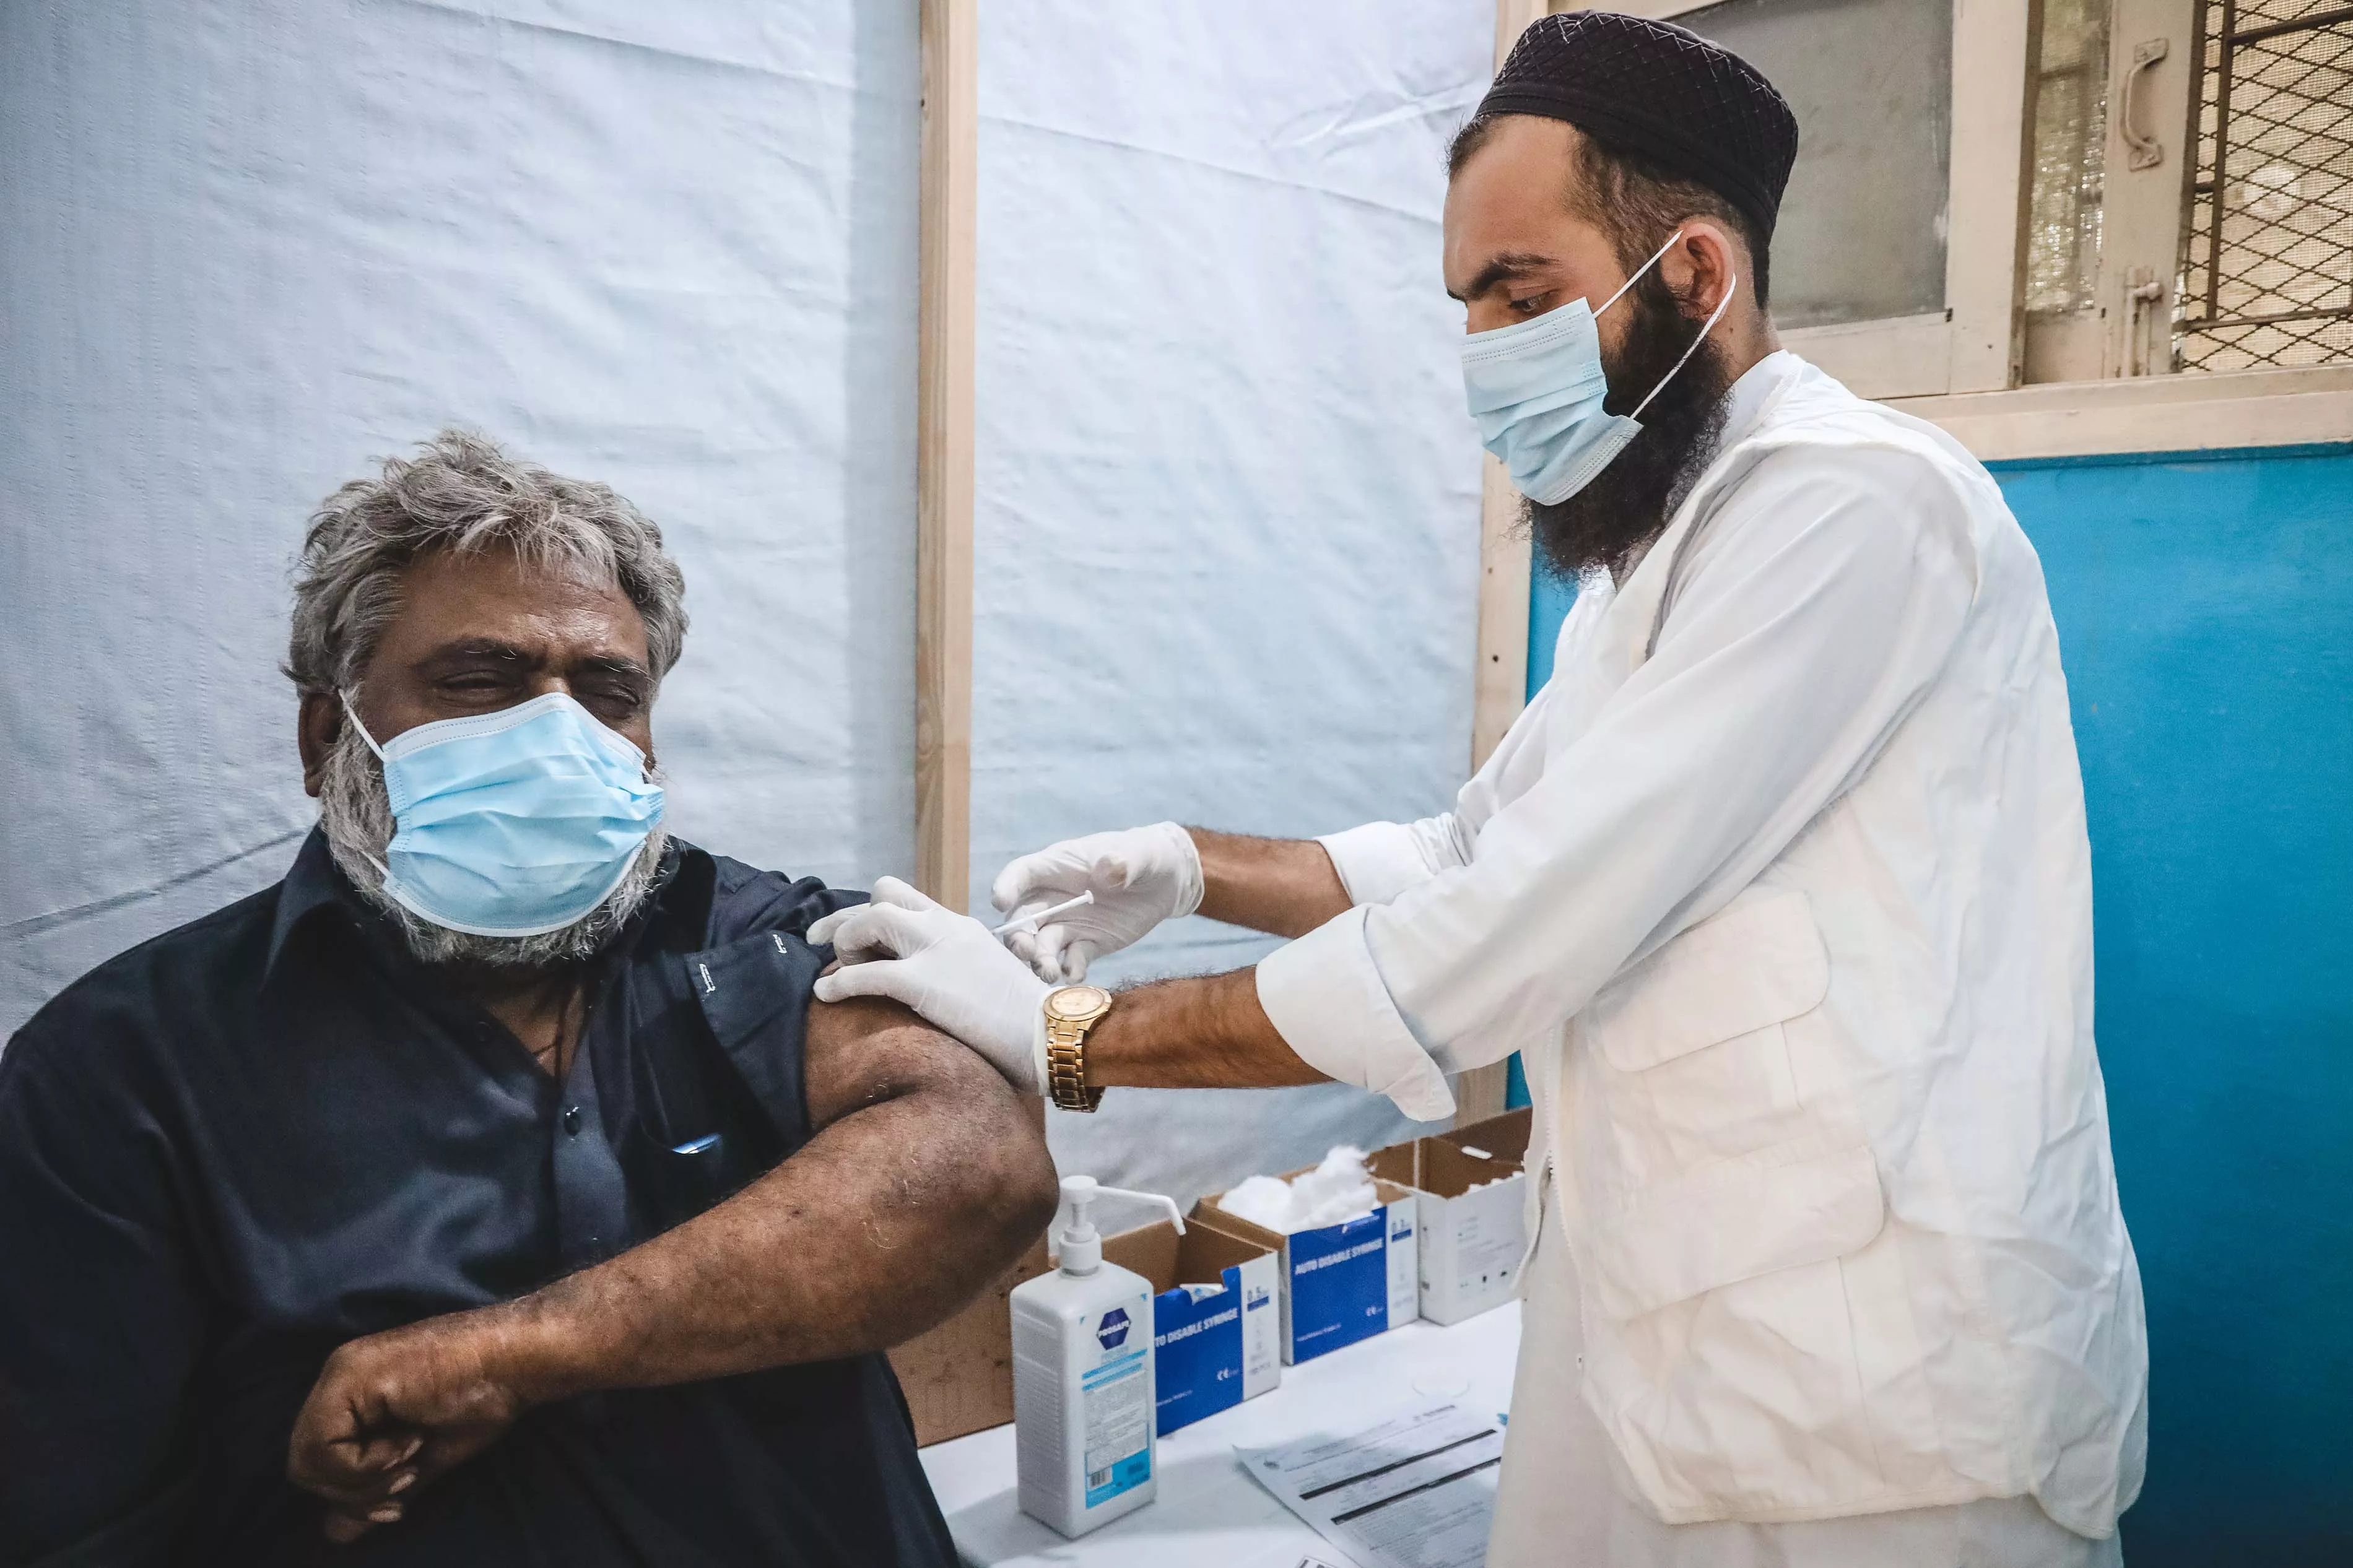 An MSF nurse administering the COVID-19 vaccine to Muhammad Sarwar.